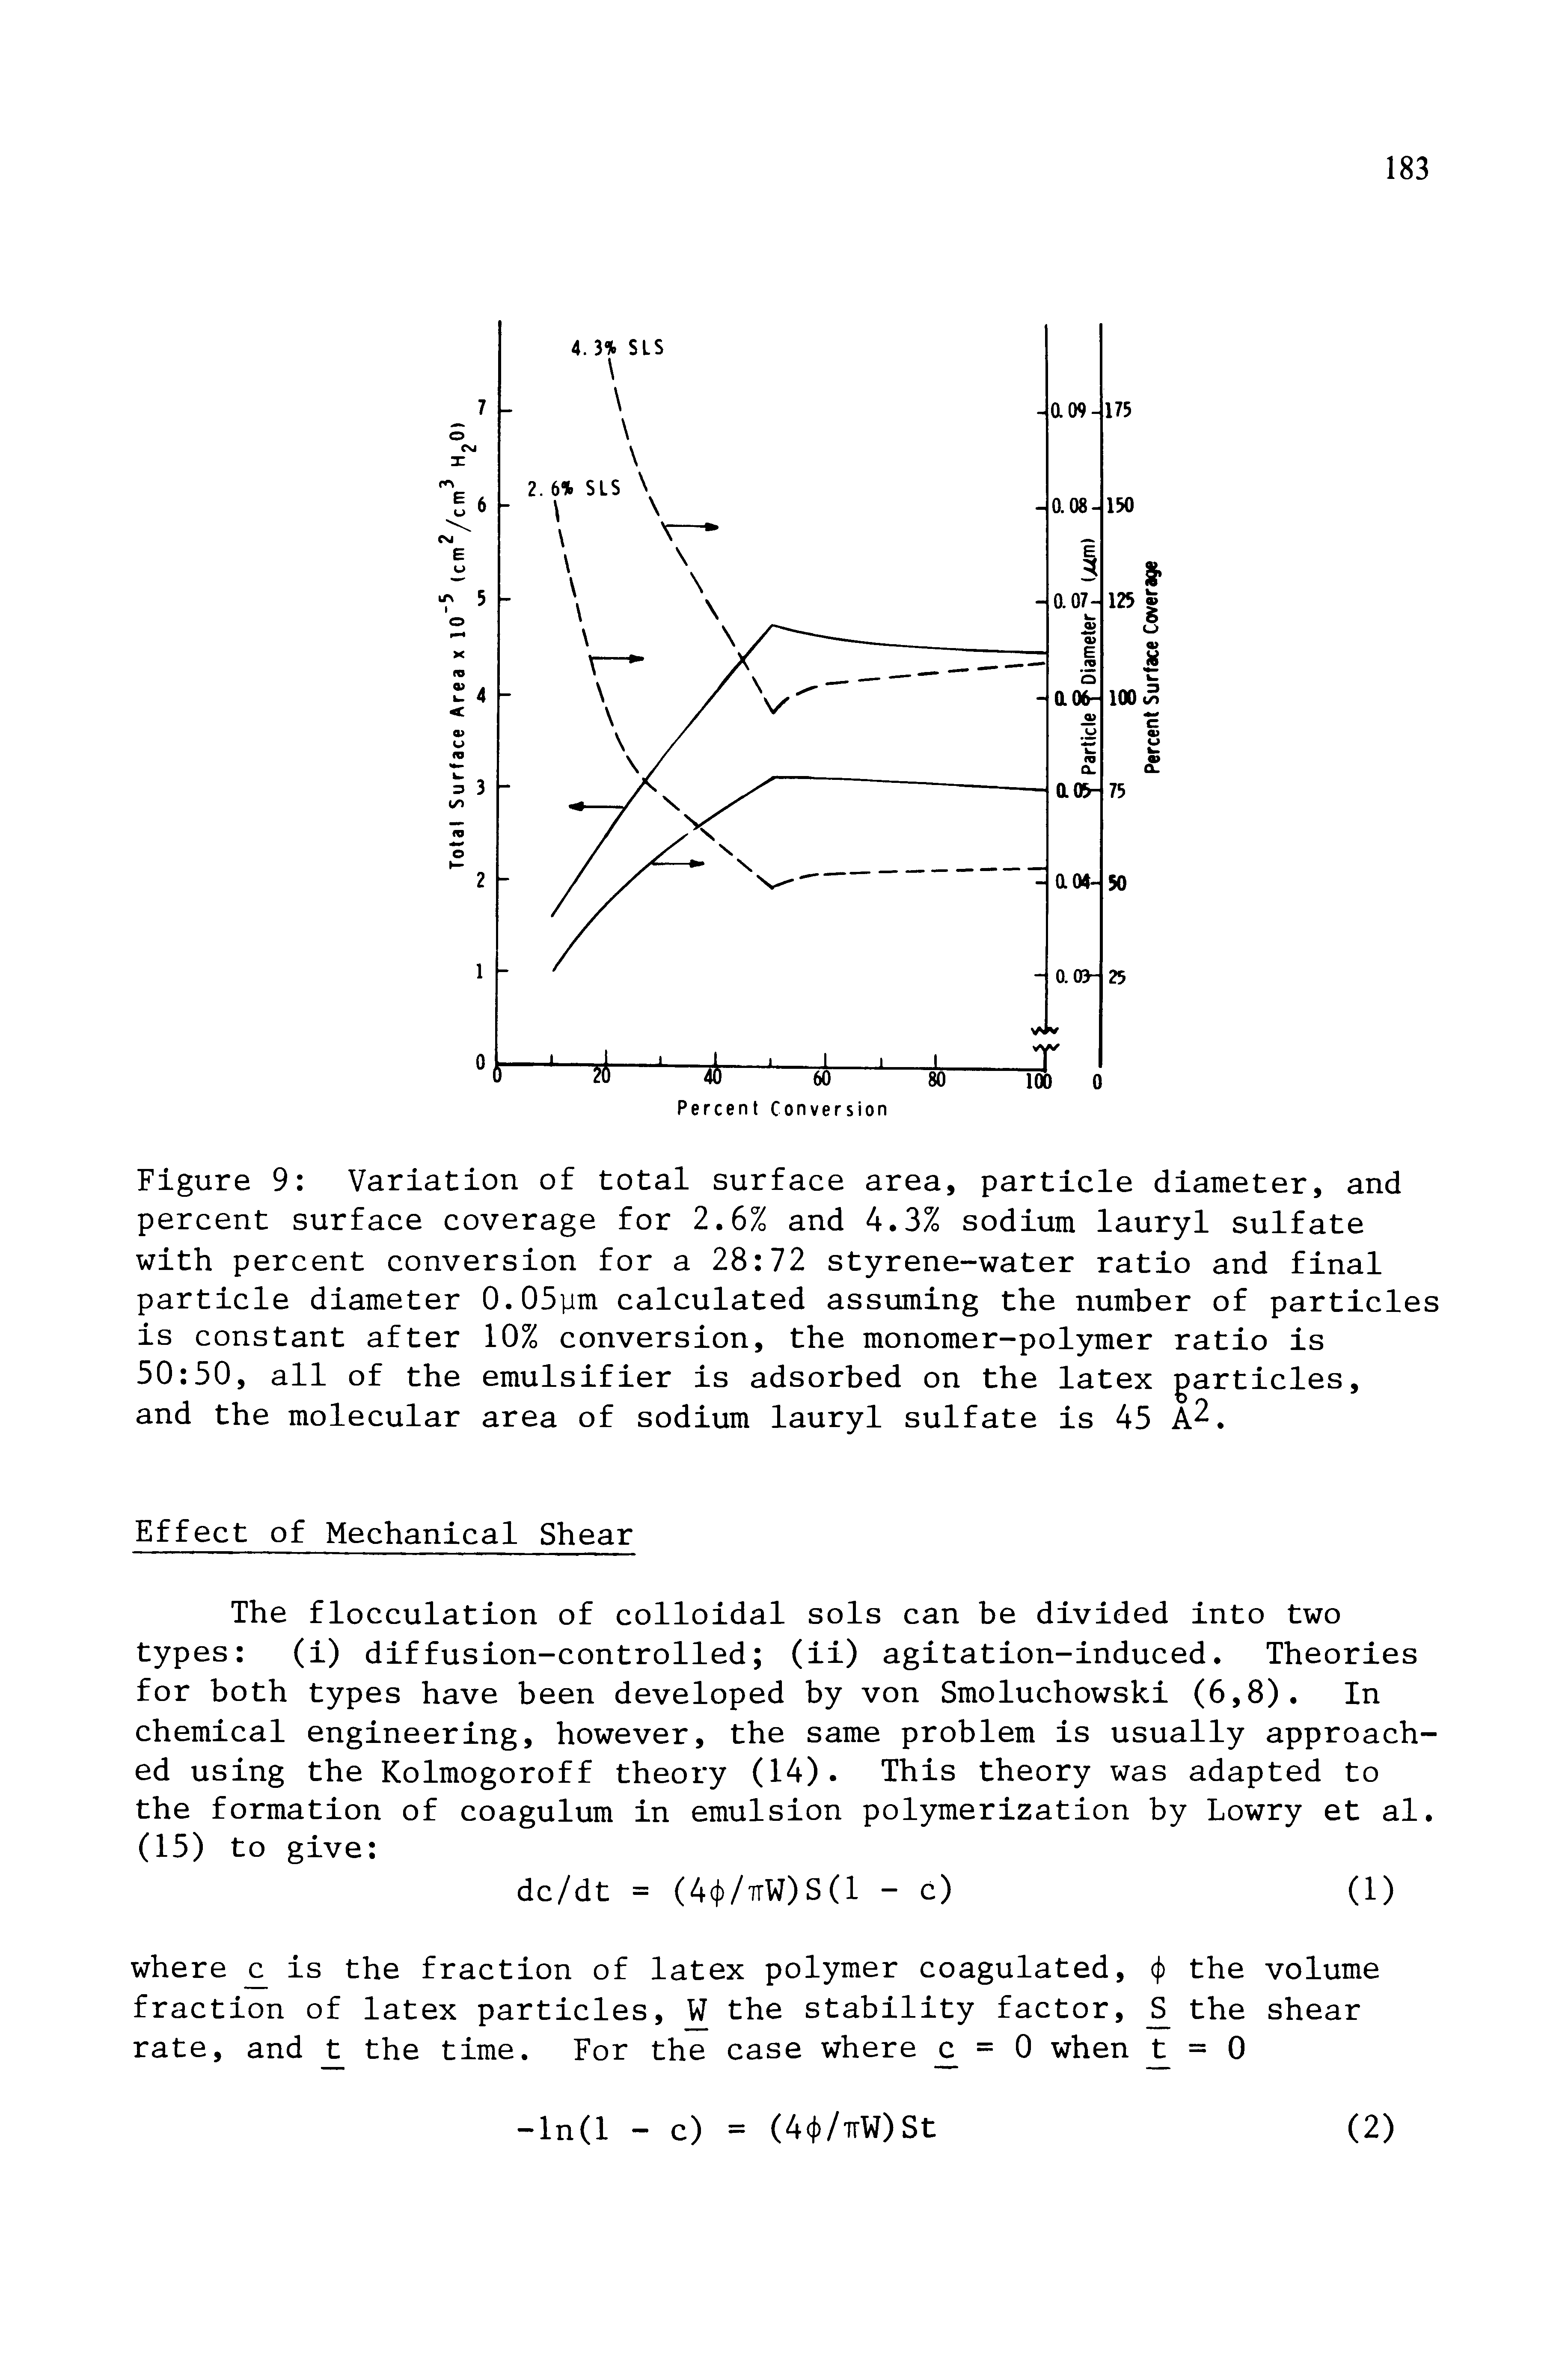 Figure 9 Variation of total surface area, particle diameter, and percent surface coverage for 2.6% and 4.3% sodium lauryl sulfate with percent conversion for a 28 72 styrene-water ratio and final particle diameter 0.05um calculated assuming the number of particles is constant after 10% conversion, the monomer-polymer ratio is 50 50, all of the emulsifier is adsorbed on the latex garticles, and the molecular area of sodium lauryl sulfate is 45 A. ...